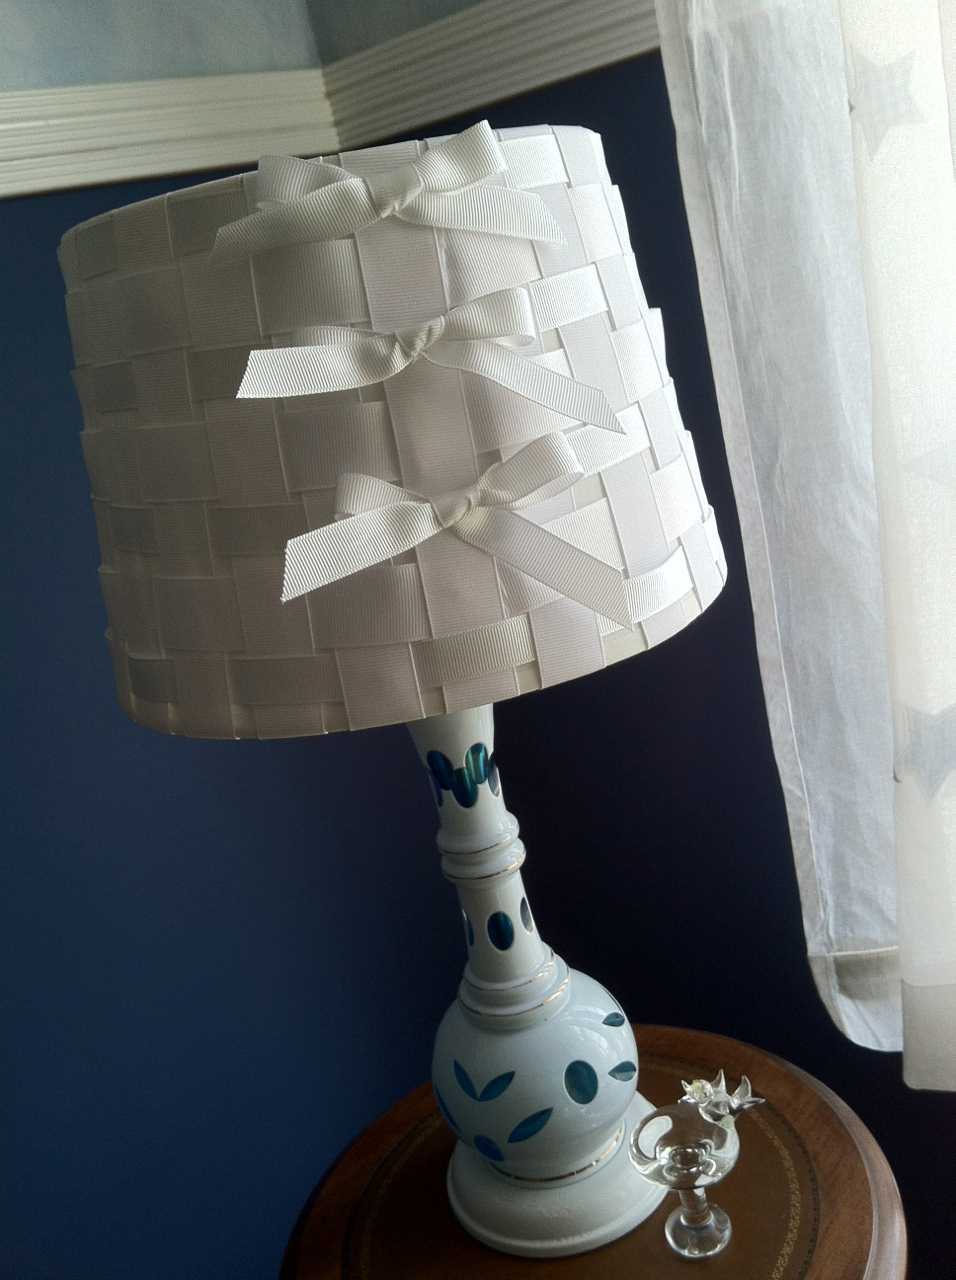 unusual design of the lamp shade with improvised materials